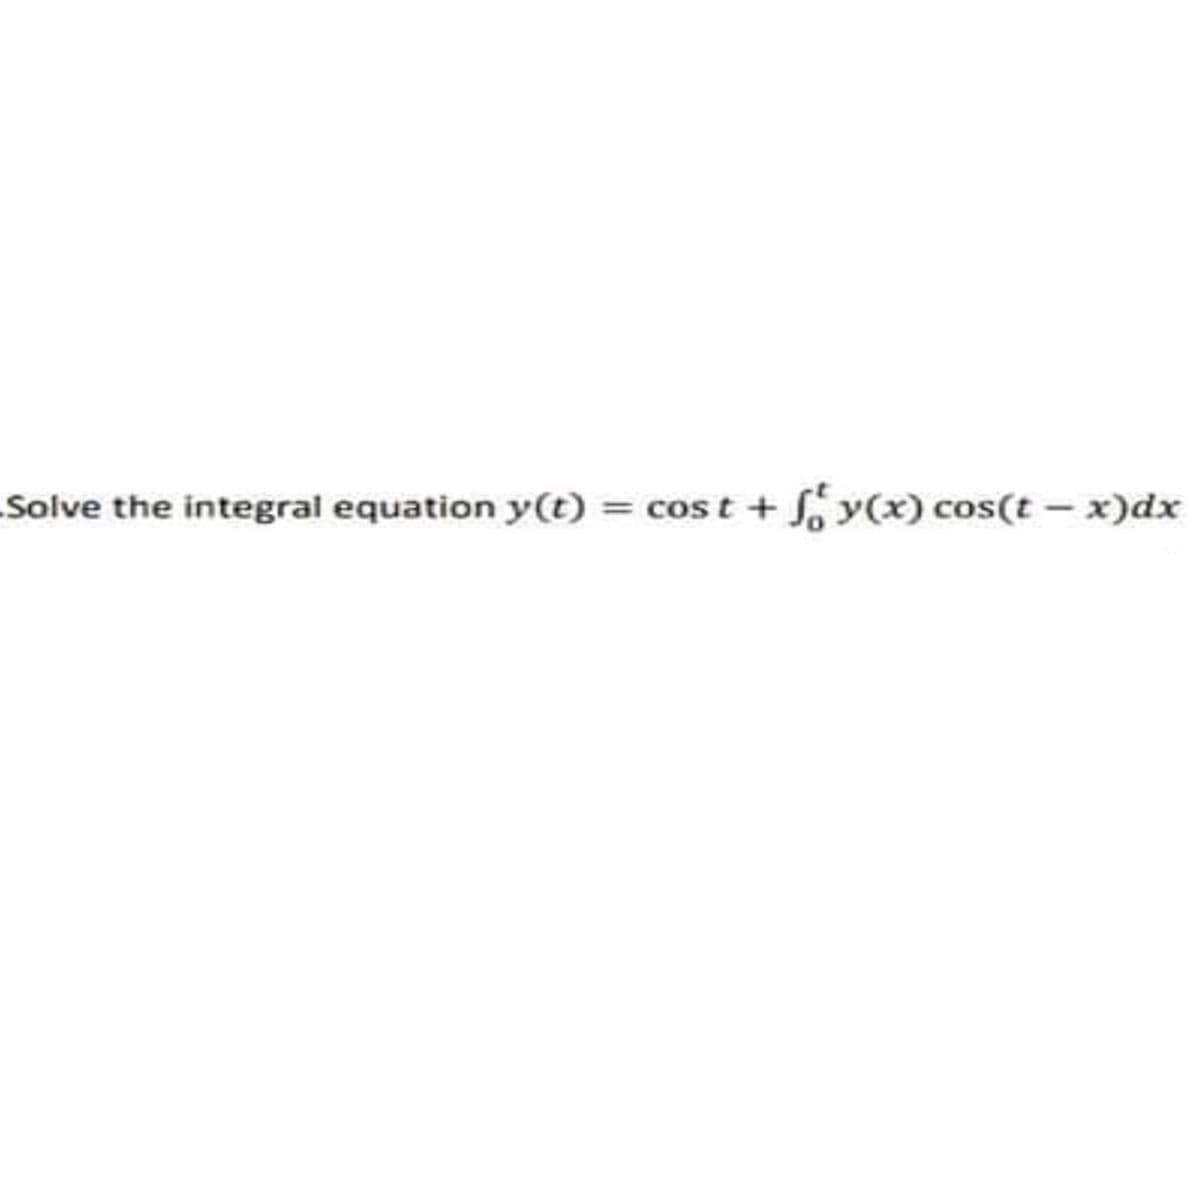 Solve the integral equation y(t) = cost + S y(x) cos(t – x)dx
